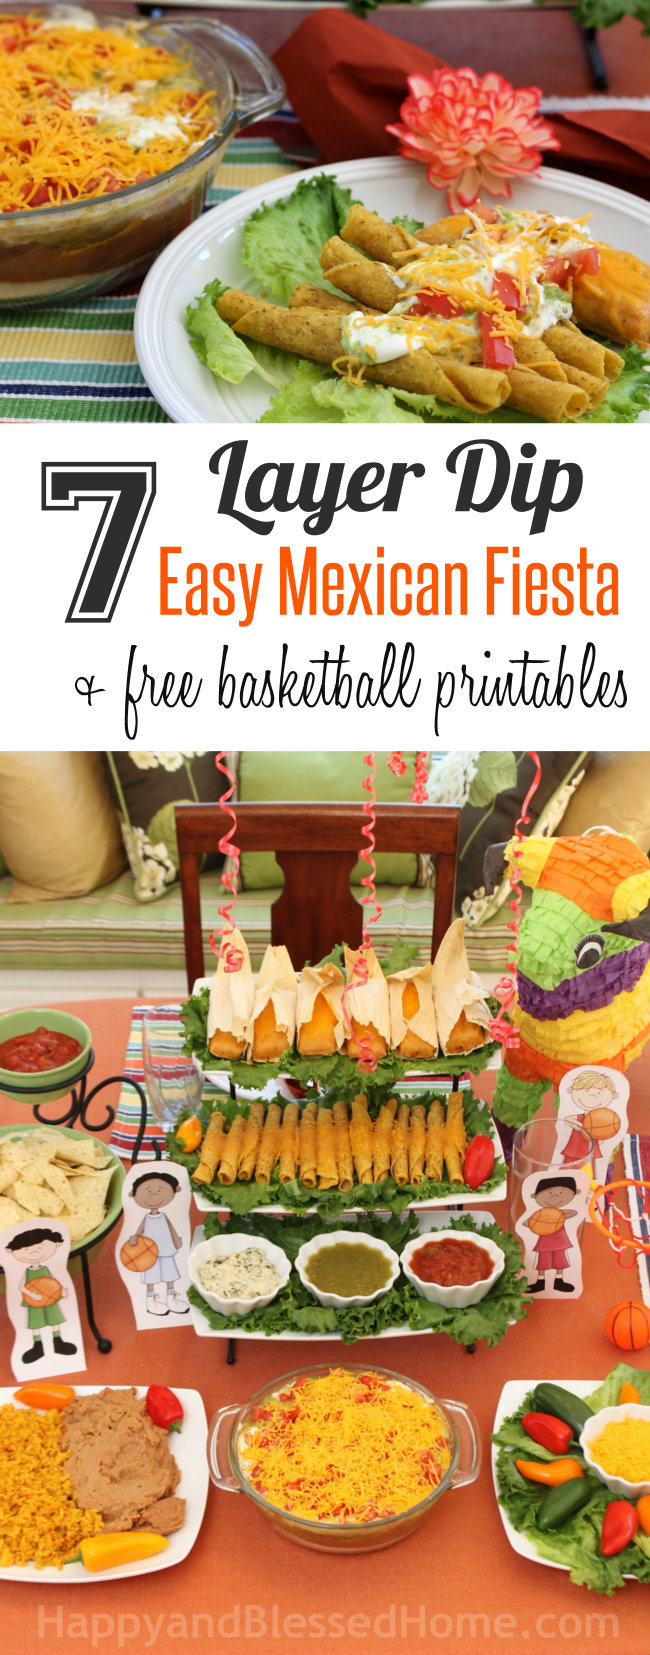 Seven Layer Dip with an Esay Mexican Fiesta and Free Basketball Printables for your next Basketball Party from HappyandBlessedHome.com